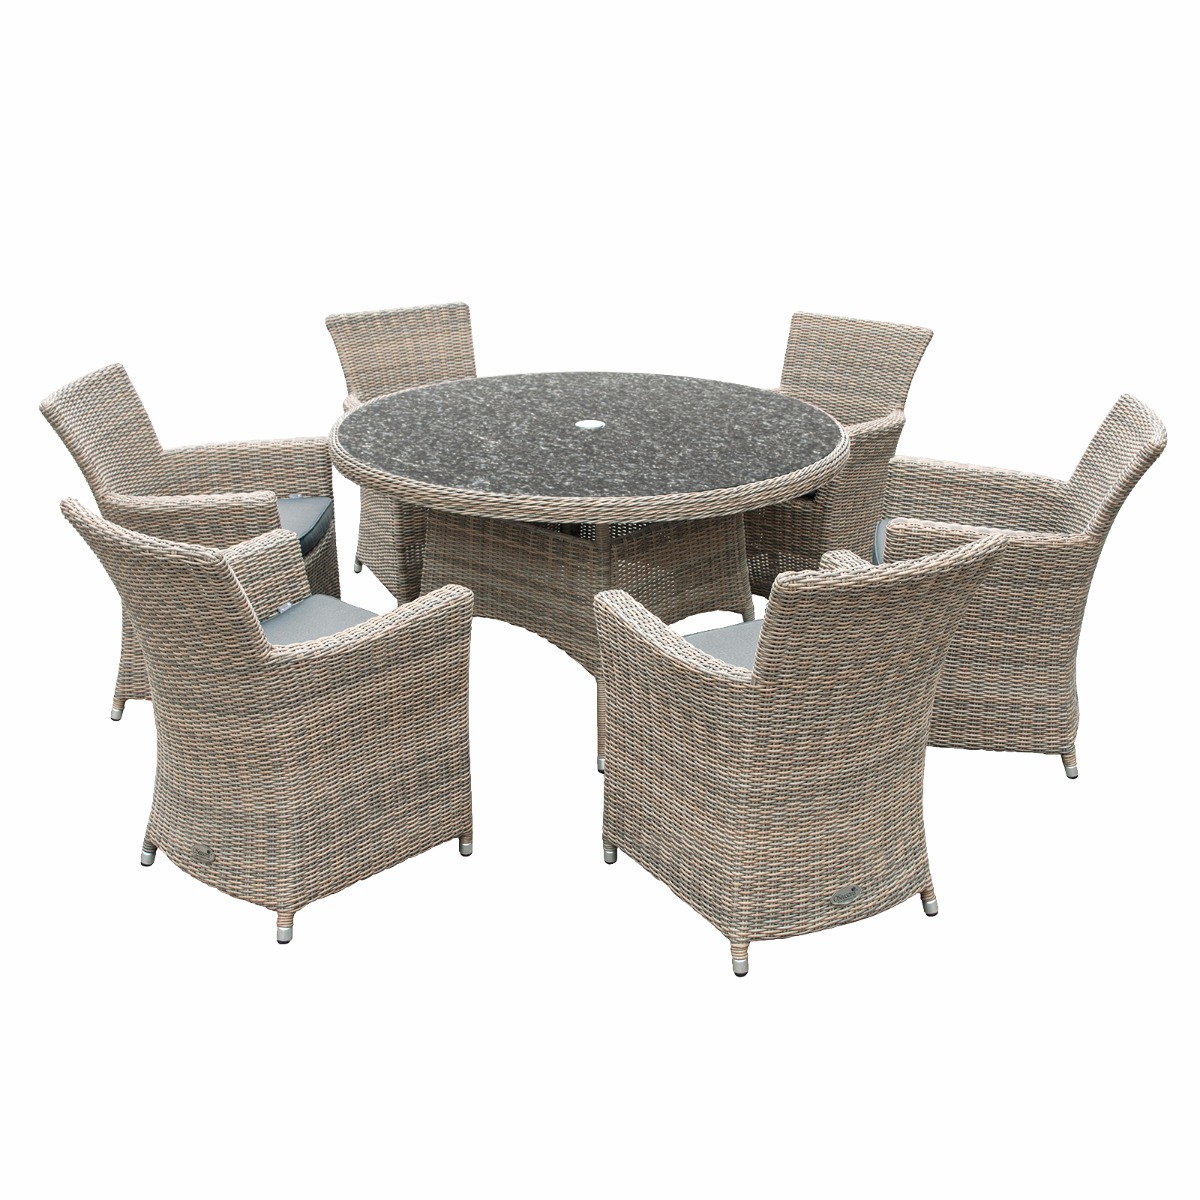 Outdoor Garden Furniture Set OSeasons Patio Table & Two Chairs Rattan Taupe 